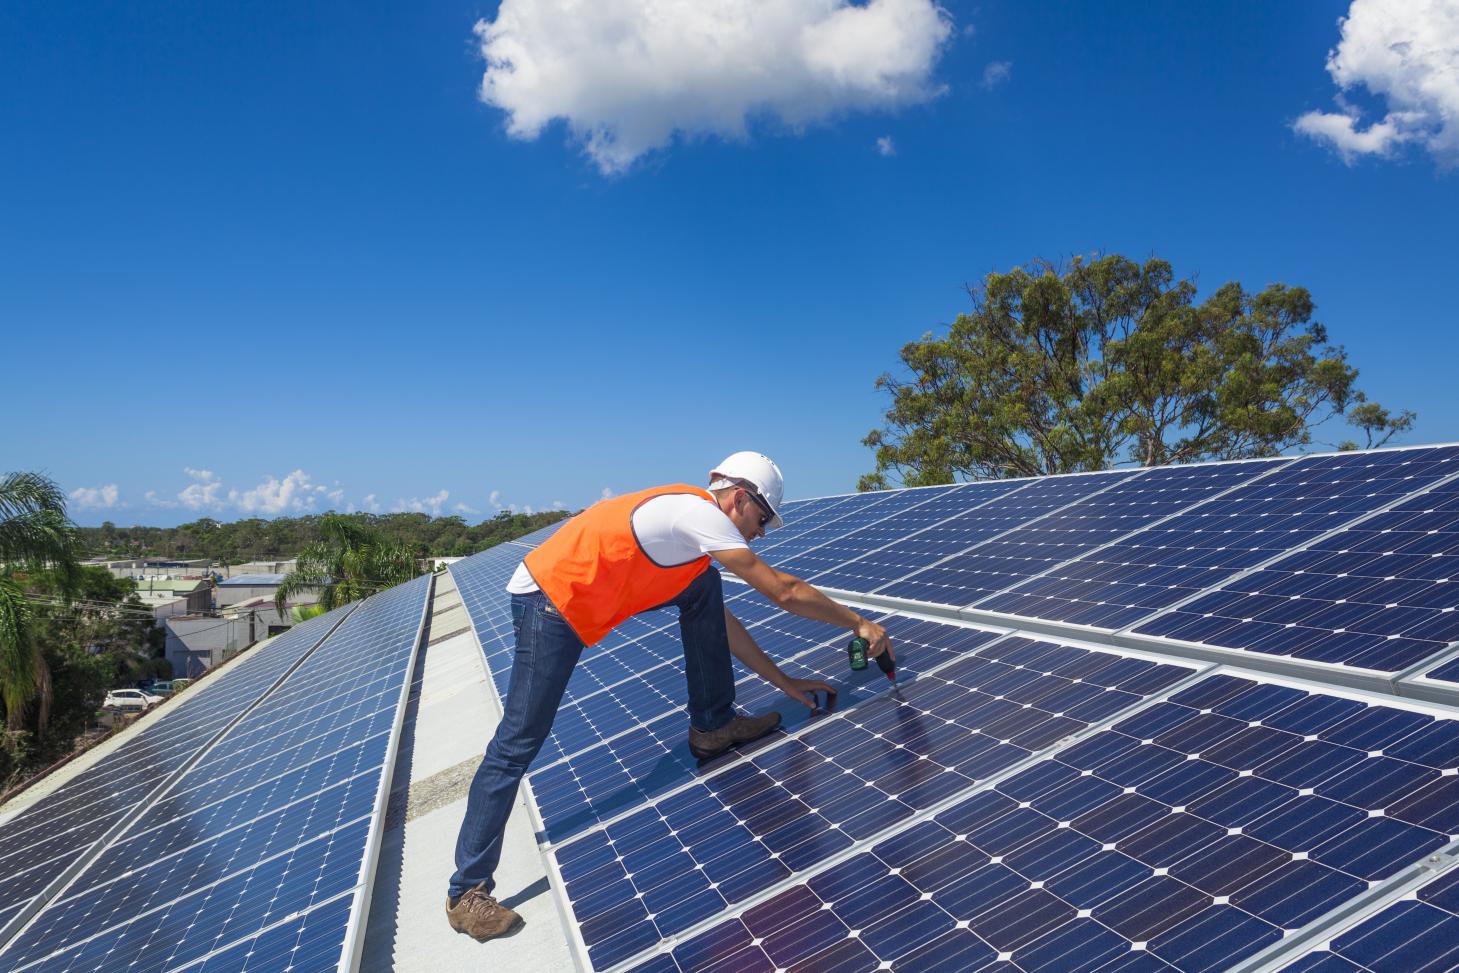 A technician installing solar panels on a roof.